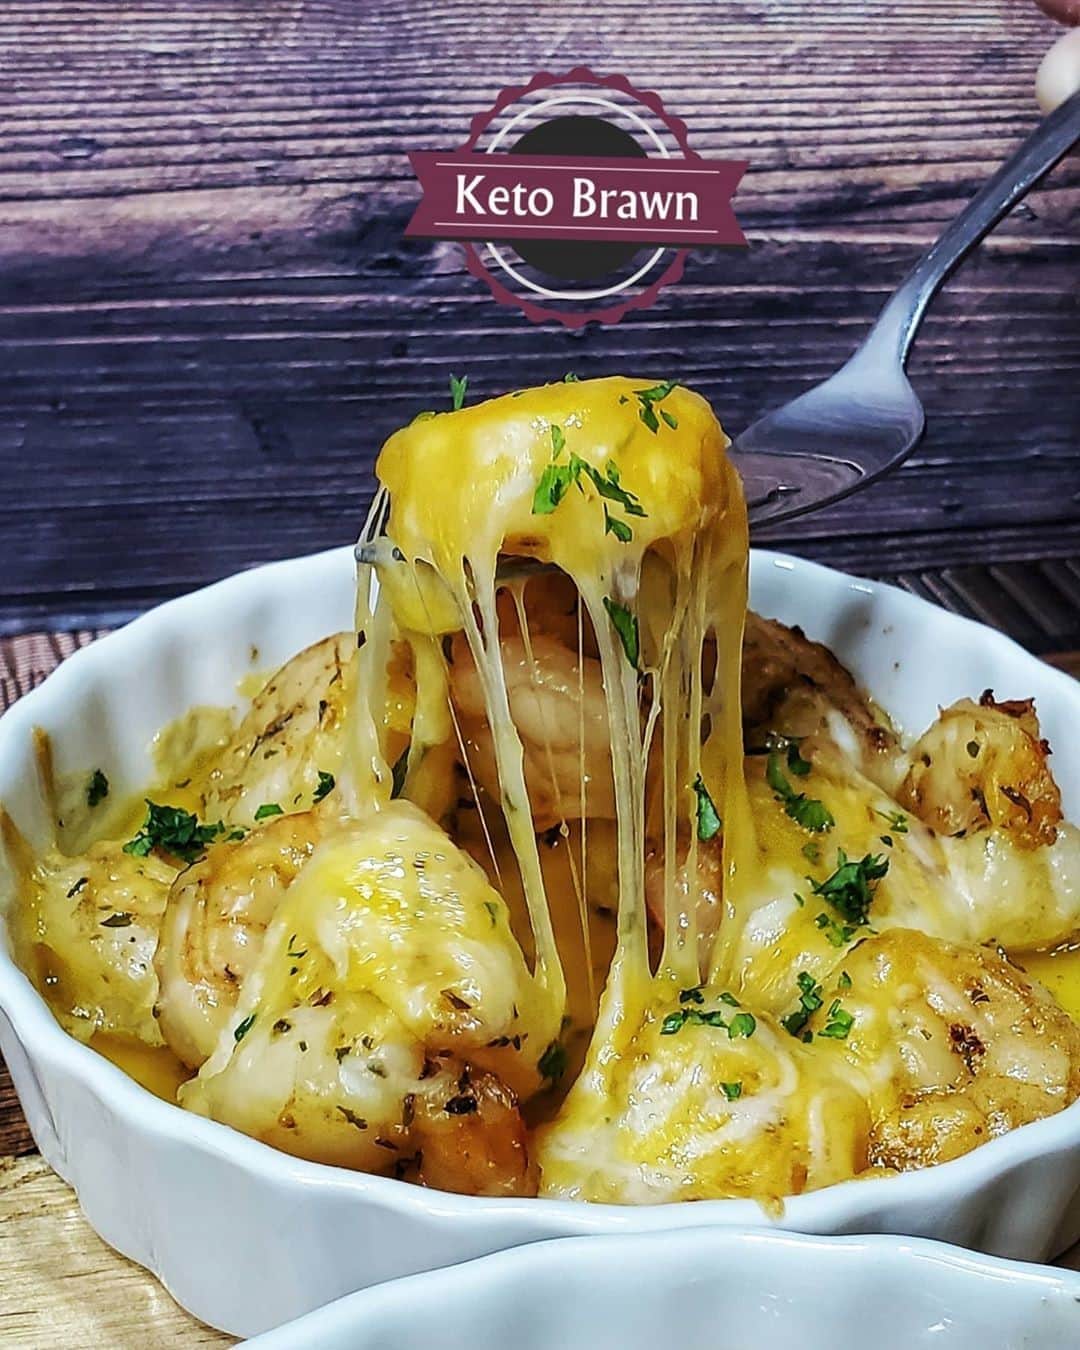 Flavorgod Seasoningsさんのインスタグラム写真 - (Flavorgod SeasoningsInstagram)「Keto Shrimp Scampi⁠ -⁠ Customer:👉 @ketobrawn⁠ Seasoned with:👉 #Flavorgod Garlic Lovers Seasoning!⁠ -⁠ KETO friendly flavors available here ⬇️⁠ Click link in the bio -> @flavorgod⁠ www.flavorgod.com⁠ -⁠ "We don't have the freshest of seafood selections being in Illinois, but we work with what we've got🤣😁 This scampi was made with frozen shrimp from walmart. I did make a broth from the tails though 😋😋😋😋"⠀⁠ ⠀⁠ 1 bag of frozen shrimp, tails on⠀⁠ 3 tbsp of butter⠀⁠ 1 tbsp minced garlic⠀⁠ @flavorgod Garlic Lovers ⠀⁠ Fresh parsley chopped⠀⁠ Salt pepper⠀⁠ Lemon juice⠀⁠ ⠀⁠ Preheat oven to 400° Heat up the cast iron !!! ⠀⁠ -⁠ 1) Thaw the shrimp, squeeze the tails off and put aside.⠀⁠ 2) In a small saucepan add 1 cup of water, 1 tsp salt pepper, we use @flavorgod Pink Salt and Peppercorn, 1/2 tbsp Garlic Lovers, a cap full of lemon juice, and the shrimp tails. Bring to a boil and reduce to simmer for 20 minutes. Broth will reduce a bit and be darker and flavorful.⠀⁠ 2) In a skillet on med high heat, melt 1 tbsp of butter, add the minced garlic to bloom, just a couple minutes. ⠀⁠ 3) Add the broth and let reduce . ⠀⁠ 4) Add shrimp to the skillet , some parsley, sprinkle with garlic lovers liberally, and fry til nice and colored moving around with a spatula. There won't be much liquid left if any. ⠀⁠ 5) Add 1 tbsp of butter , we used 5" ramakins, to each oven safe dish. You could totally use one big dish, just add 2 tbsp of butter.⠀⁠ 6) Add the cooked shrimp on top, and bake until nice and bubbly. About 10 minutes. ⠀⁠ You can add shredded cheese of choice on top, we did 😋😋⠀⁠ Happy hump day Brawnies !!! 🎉🎉⠀⁠ -⁠ Flavor God Seasonings are:⁠ ✅ZERO CALORIES PER SERVING⁠ ✅MADE FRESH⁠ ✅MADE LOCALLY IN US⁠ ✅FREE GIFTS AT CHECKOUT⁠ ✅GLUTEN FREE⁠ ✅#PALEO & #KETO FRIENDLY⁠ -⁠ #food #foodie #flavorgod #seasonings #glutenfree #mealprep #seasonings #breakfast #lunch #dinner #yummy #delicious #foodporn」9月17日 8時01分 - flavorgod